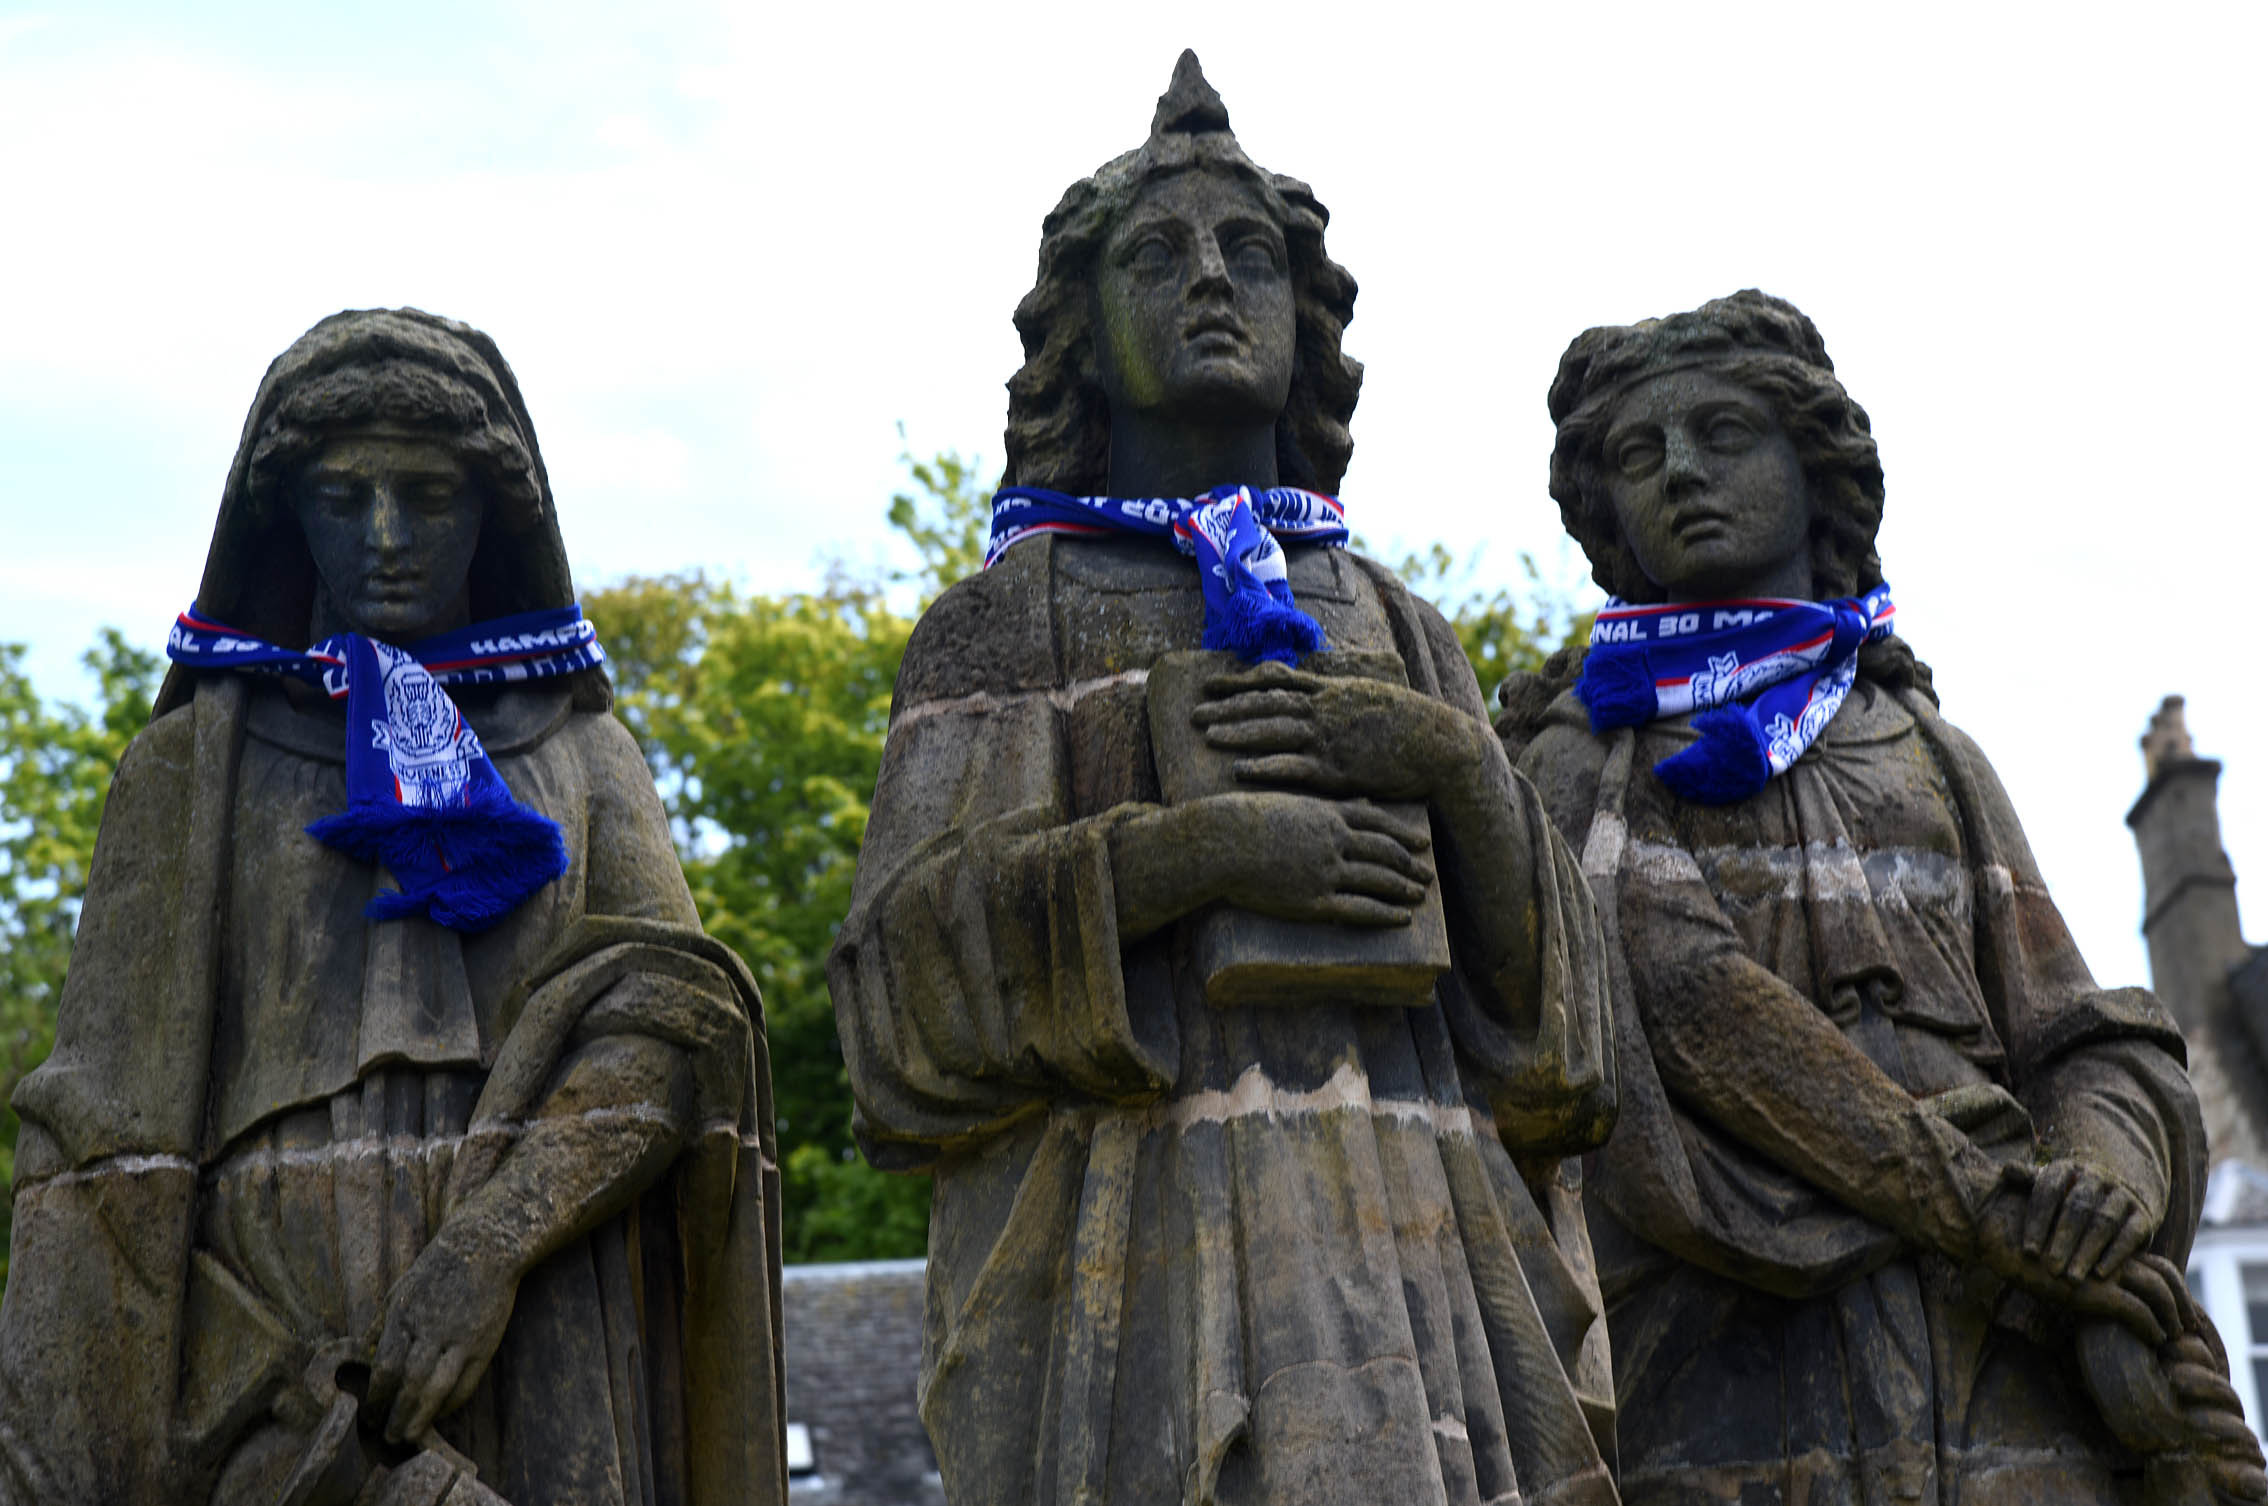 The Three Graces in Inverness show their support